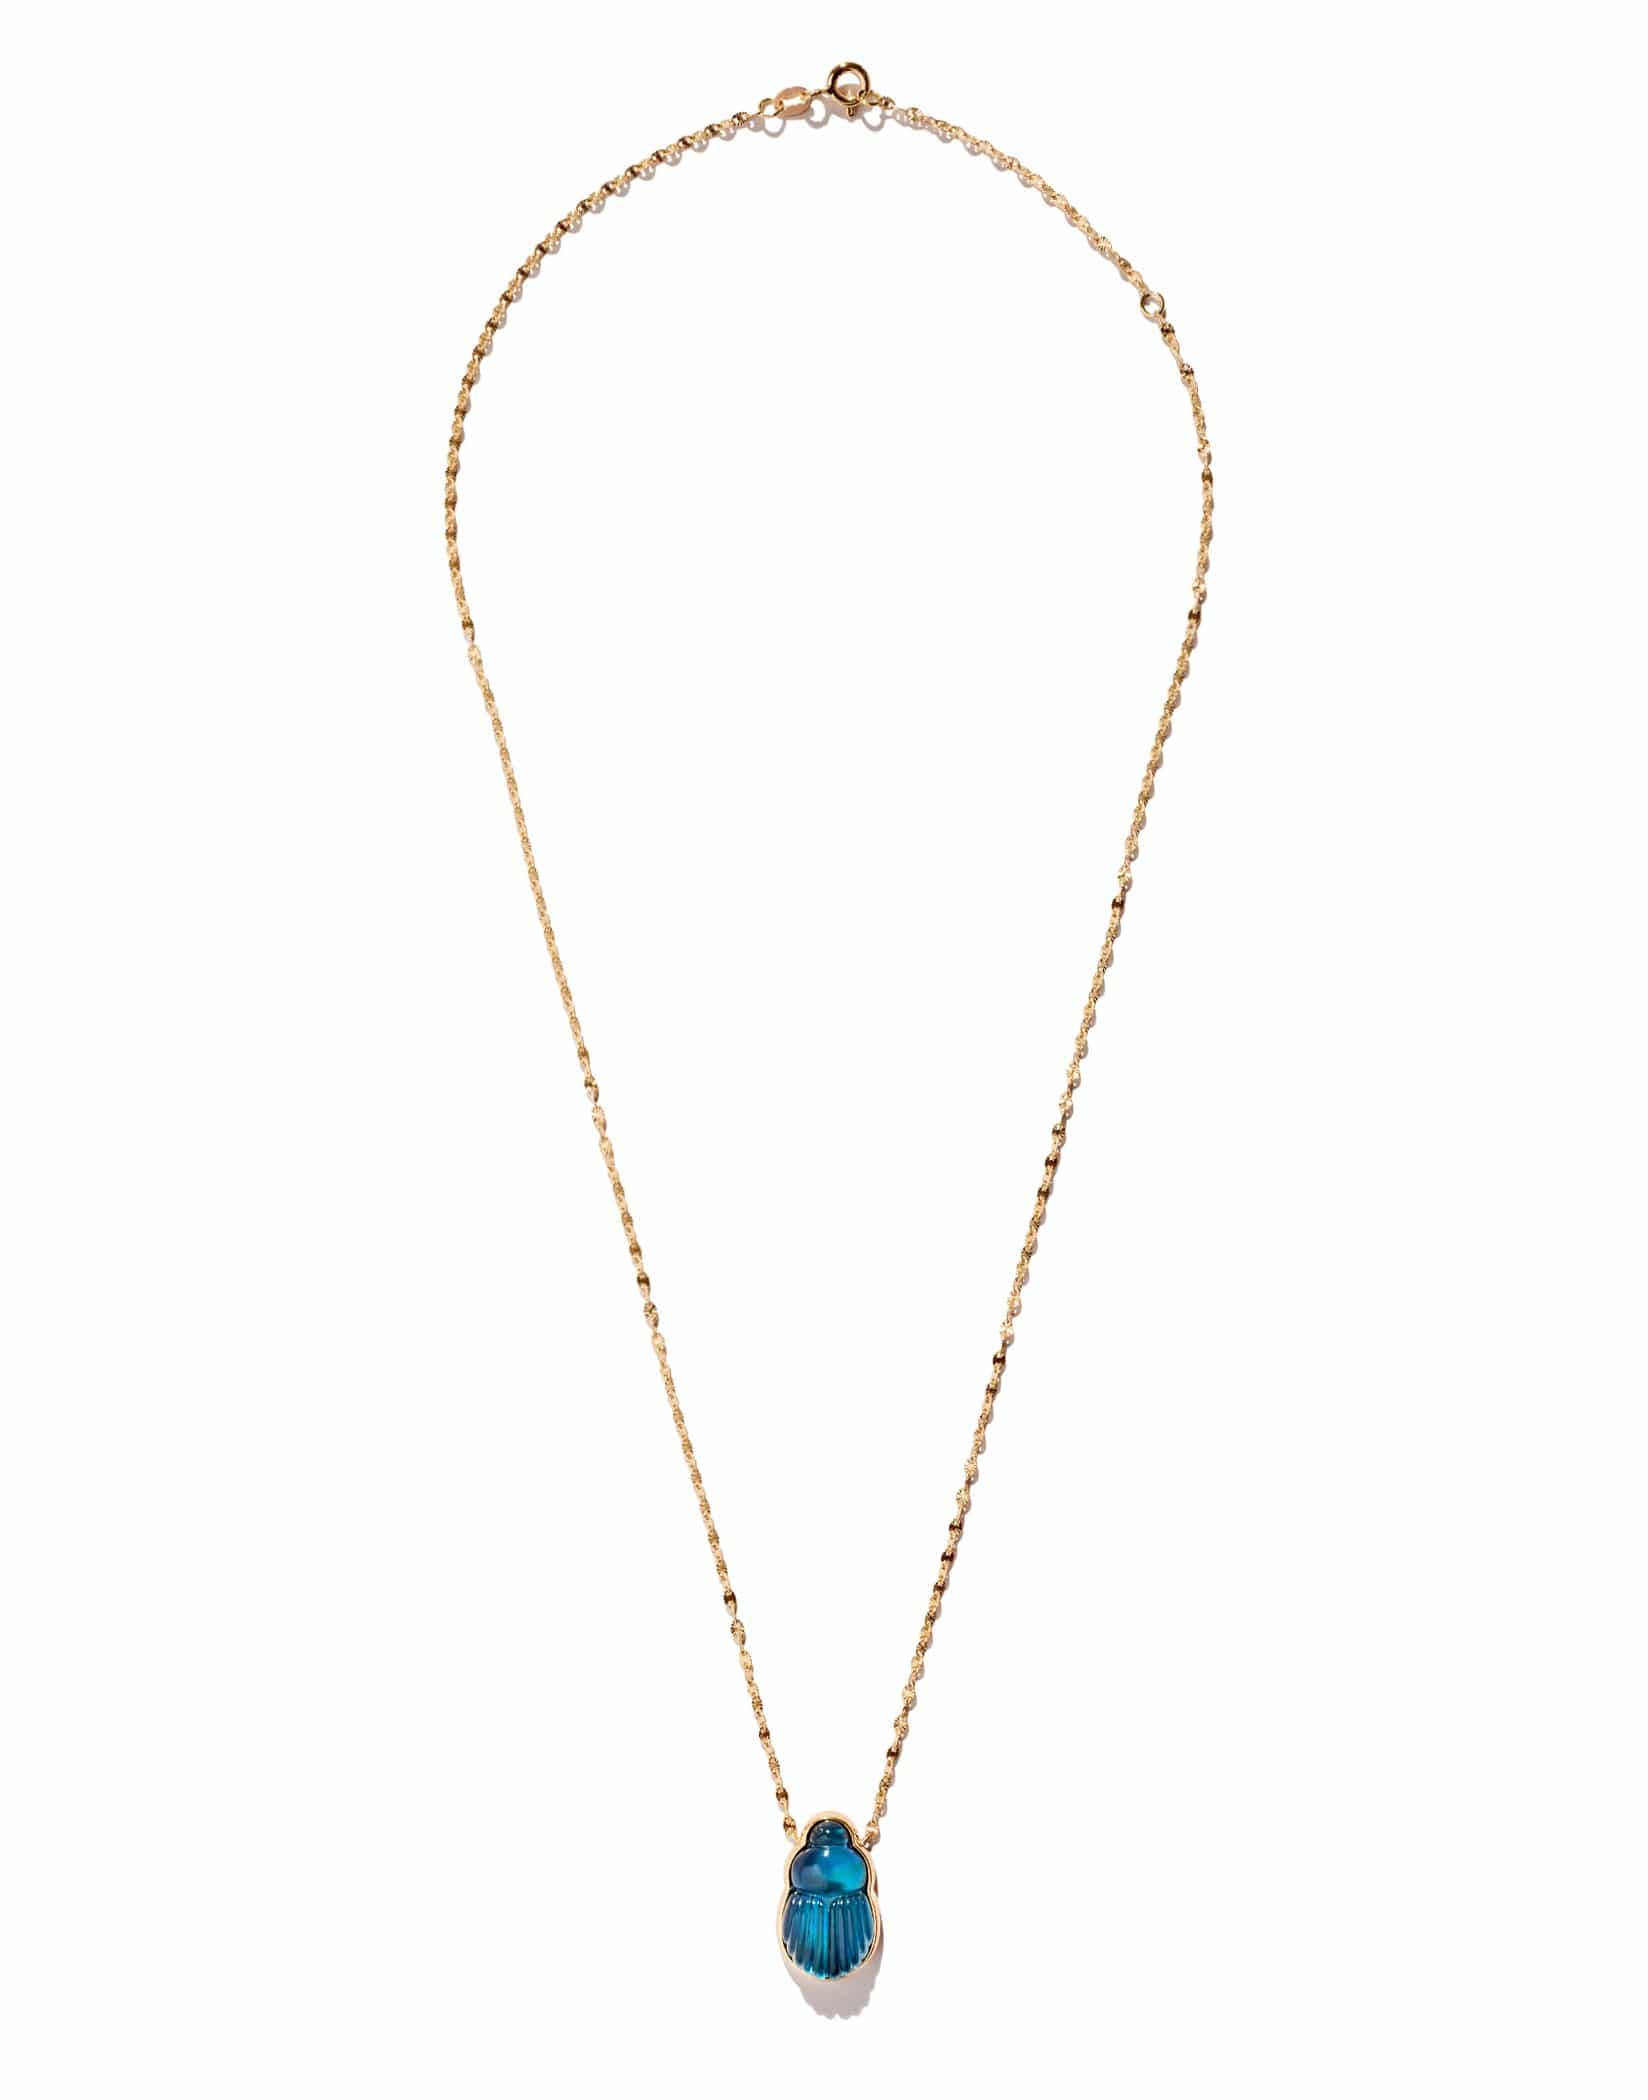 LITO-Small Sienna Blue Chalcedony Scarab Necklace-YELLOW GOLD